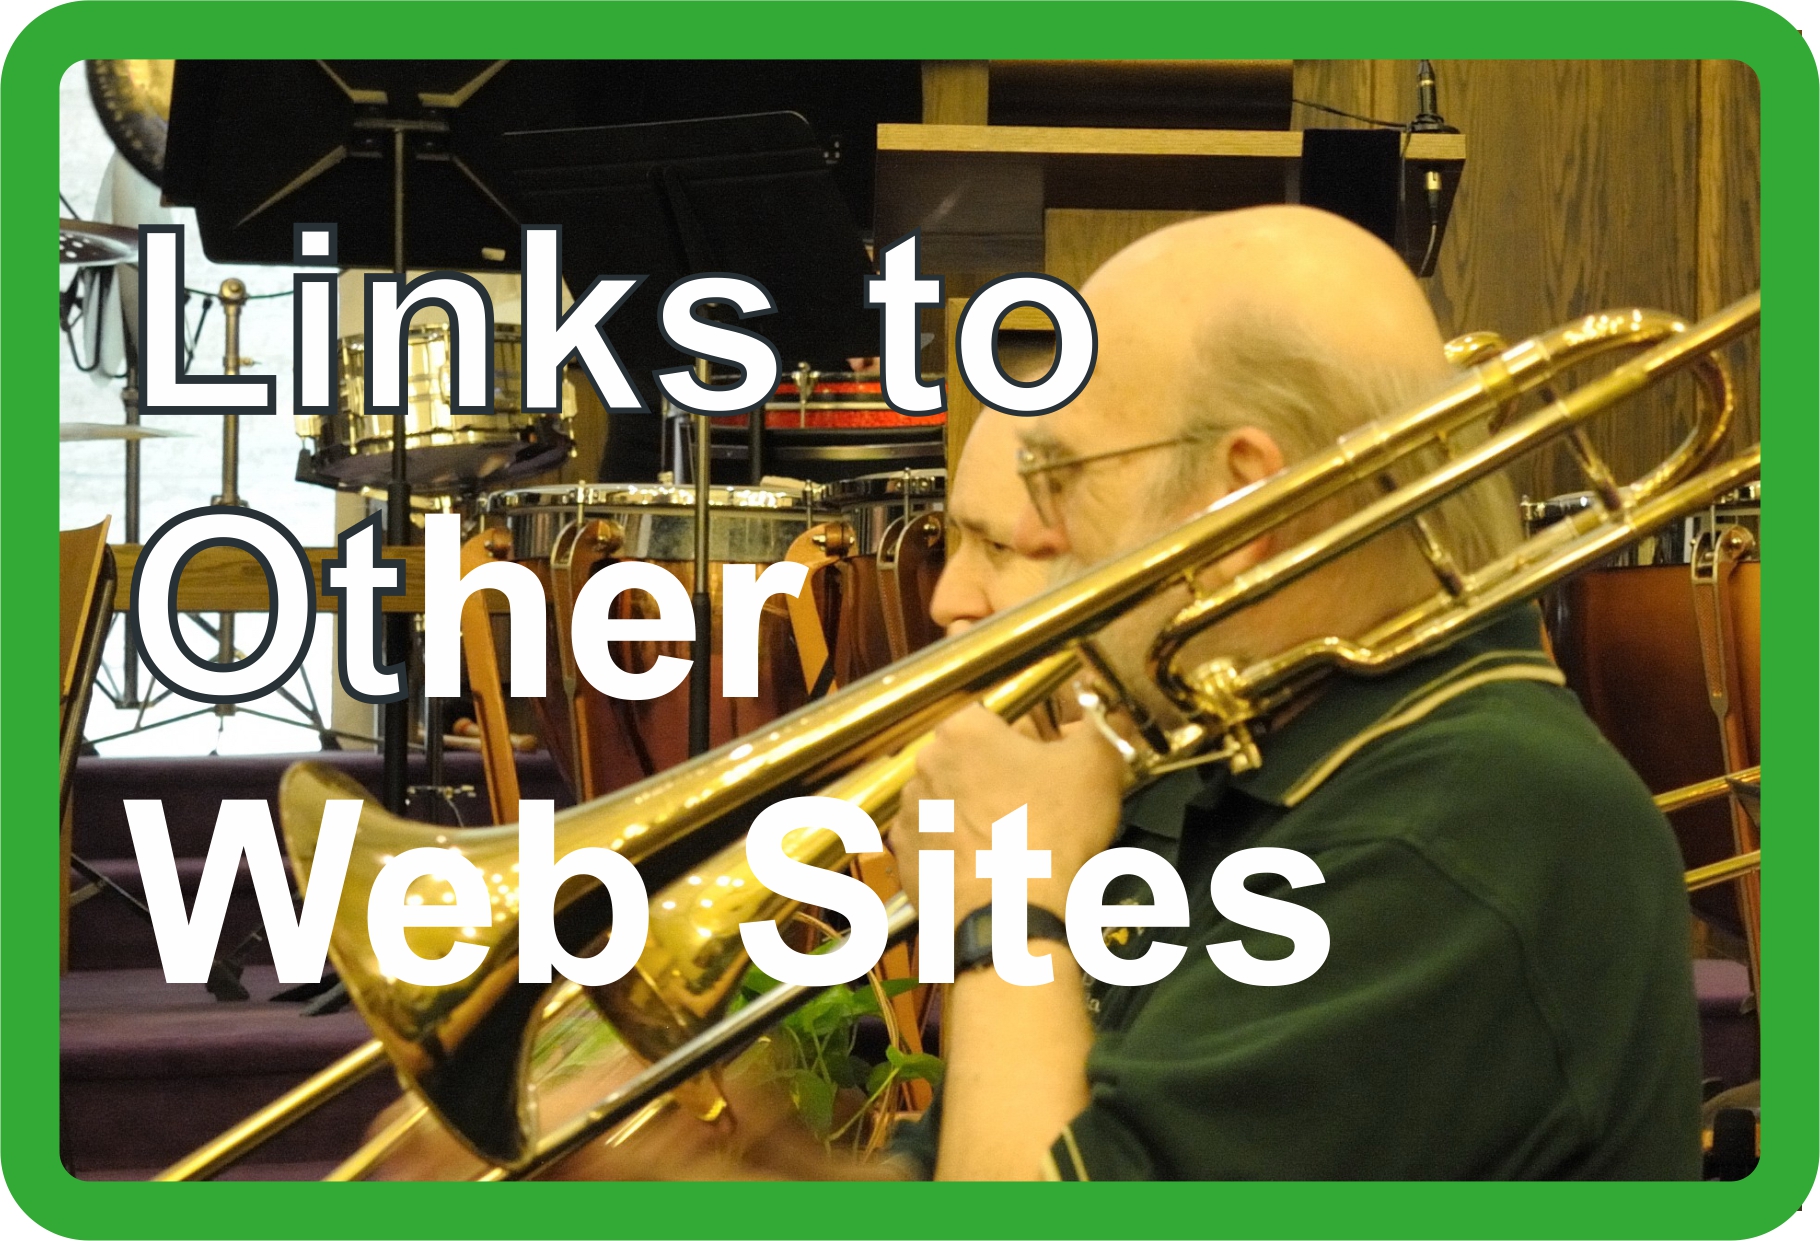 Other Web Links